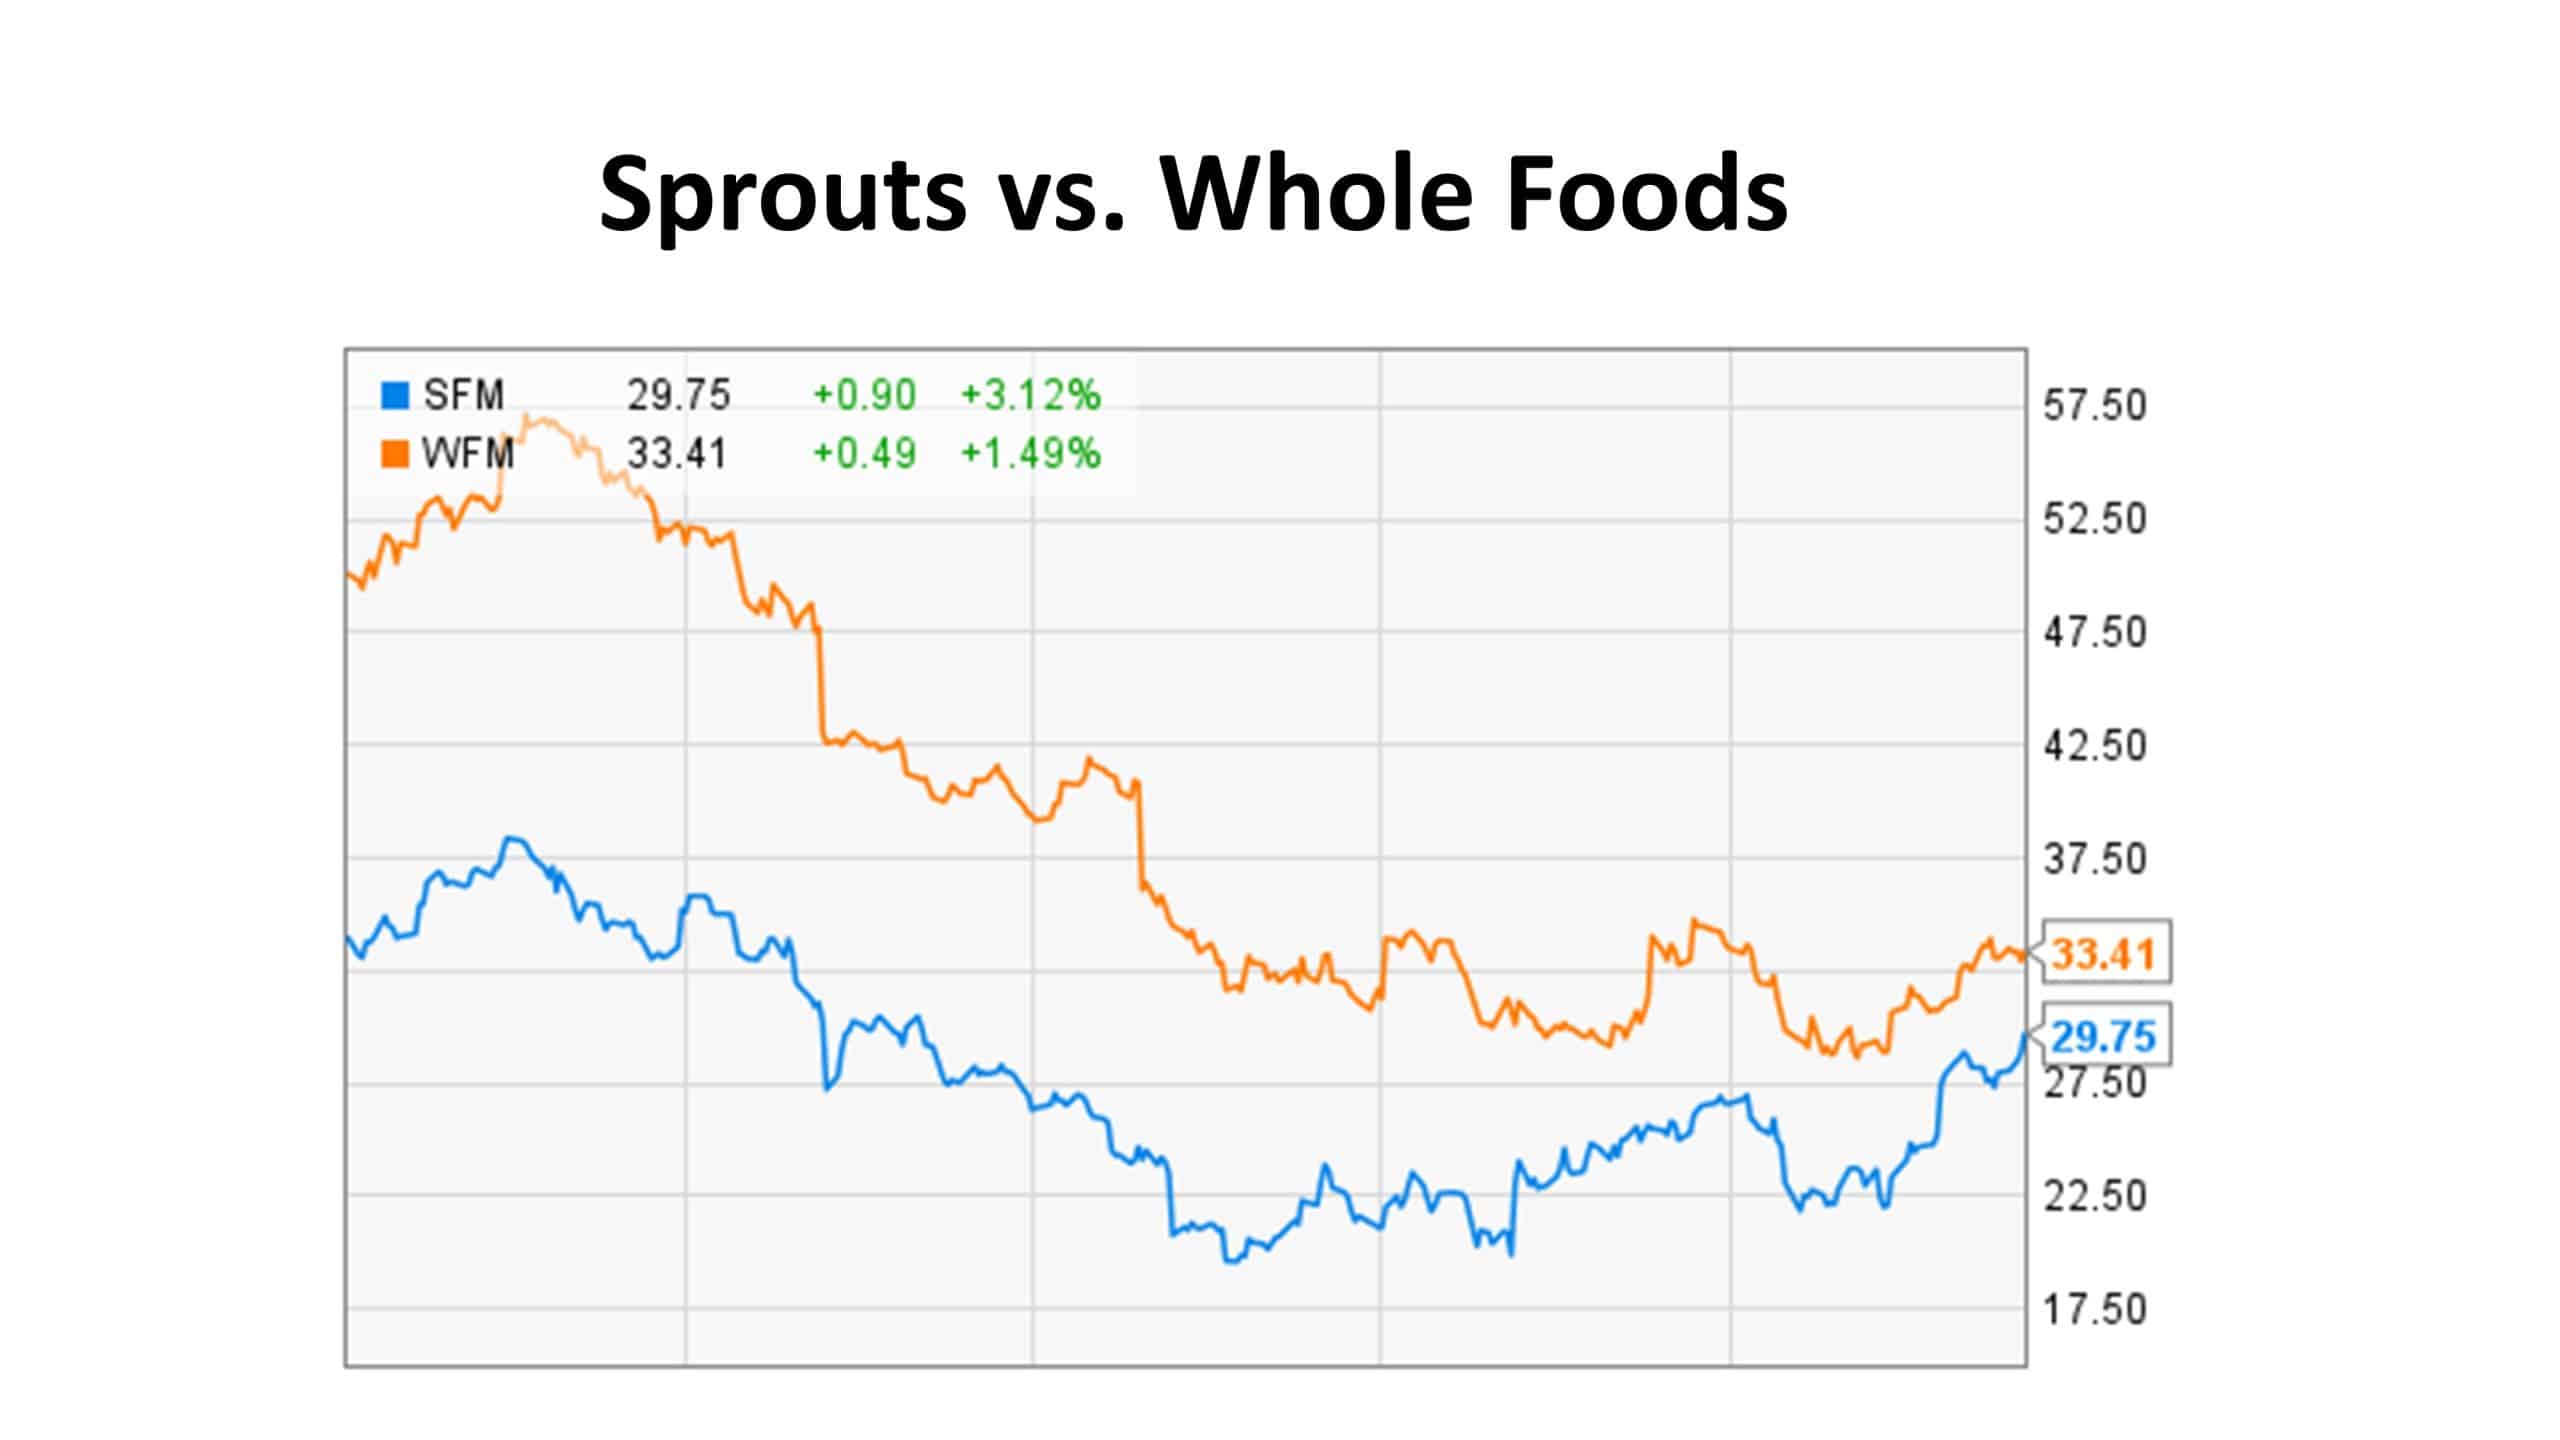 Sprouts vs. Whole Foods stocks chart